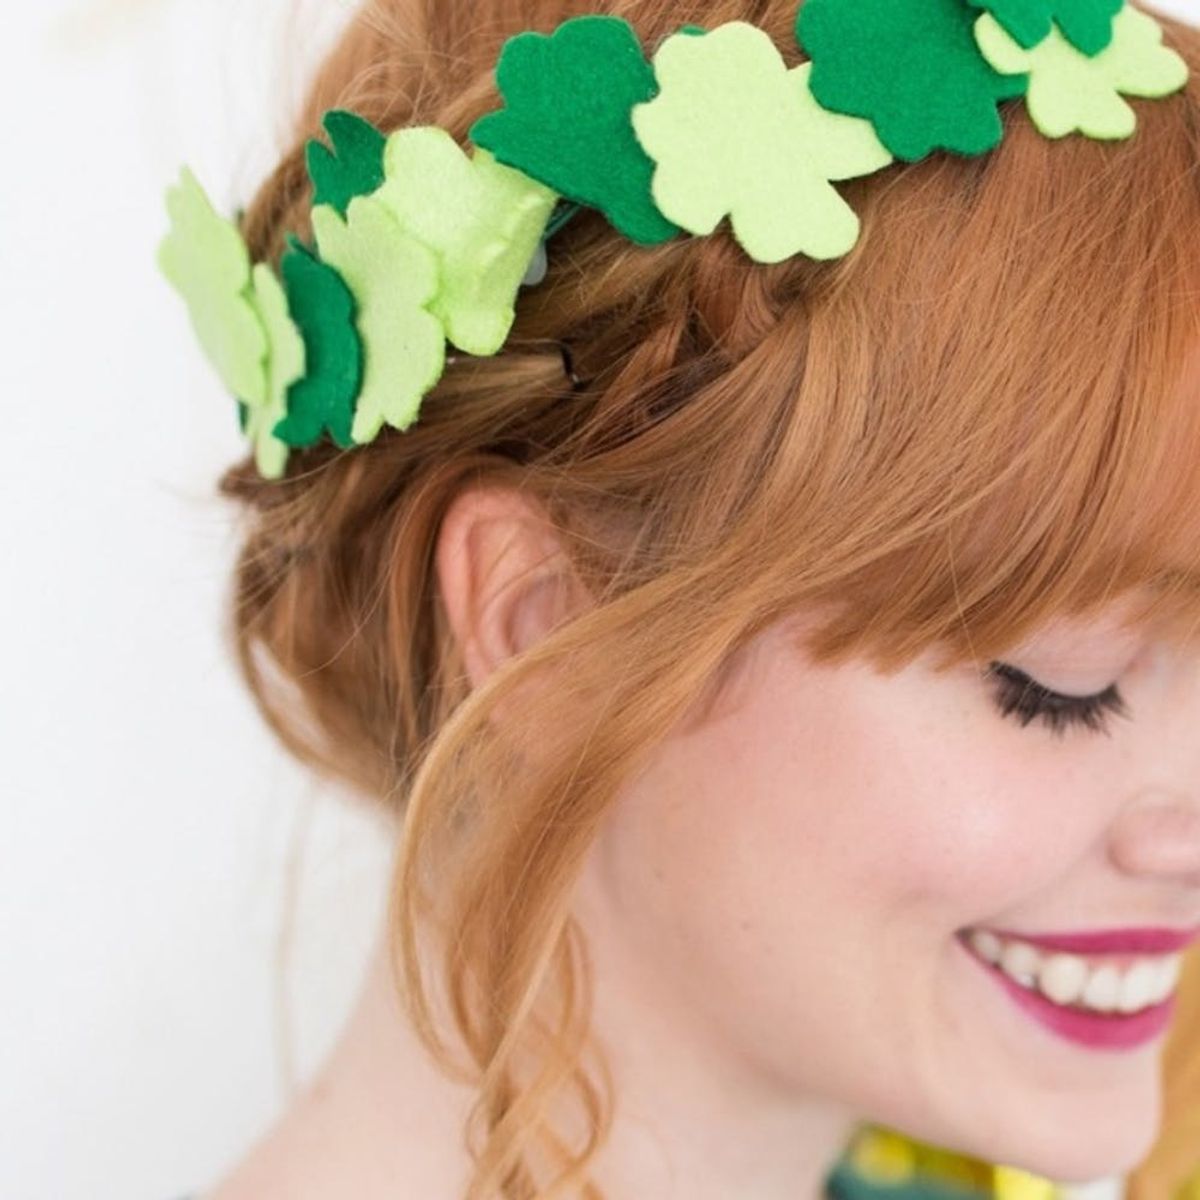 Champagne Buzzers, Clover Crowns + More DIYs to Make This Weekend